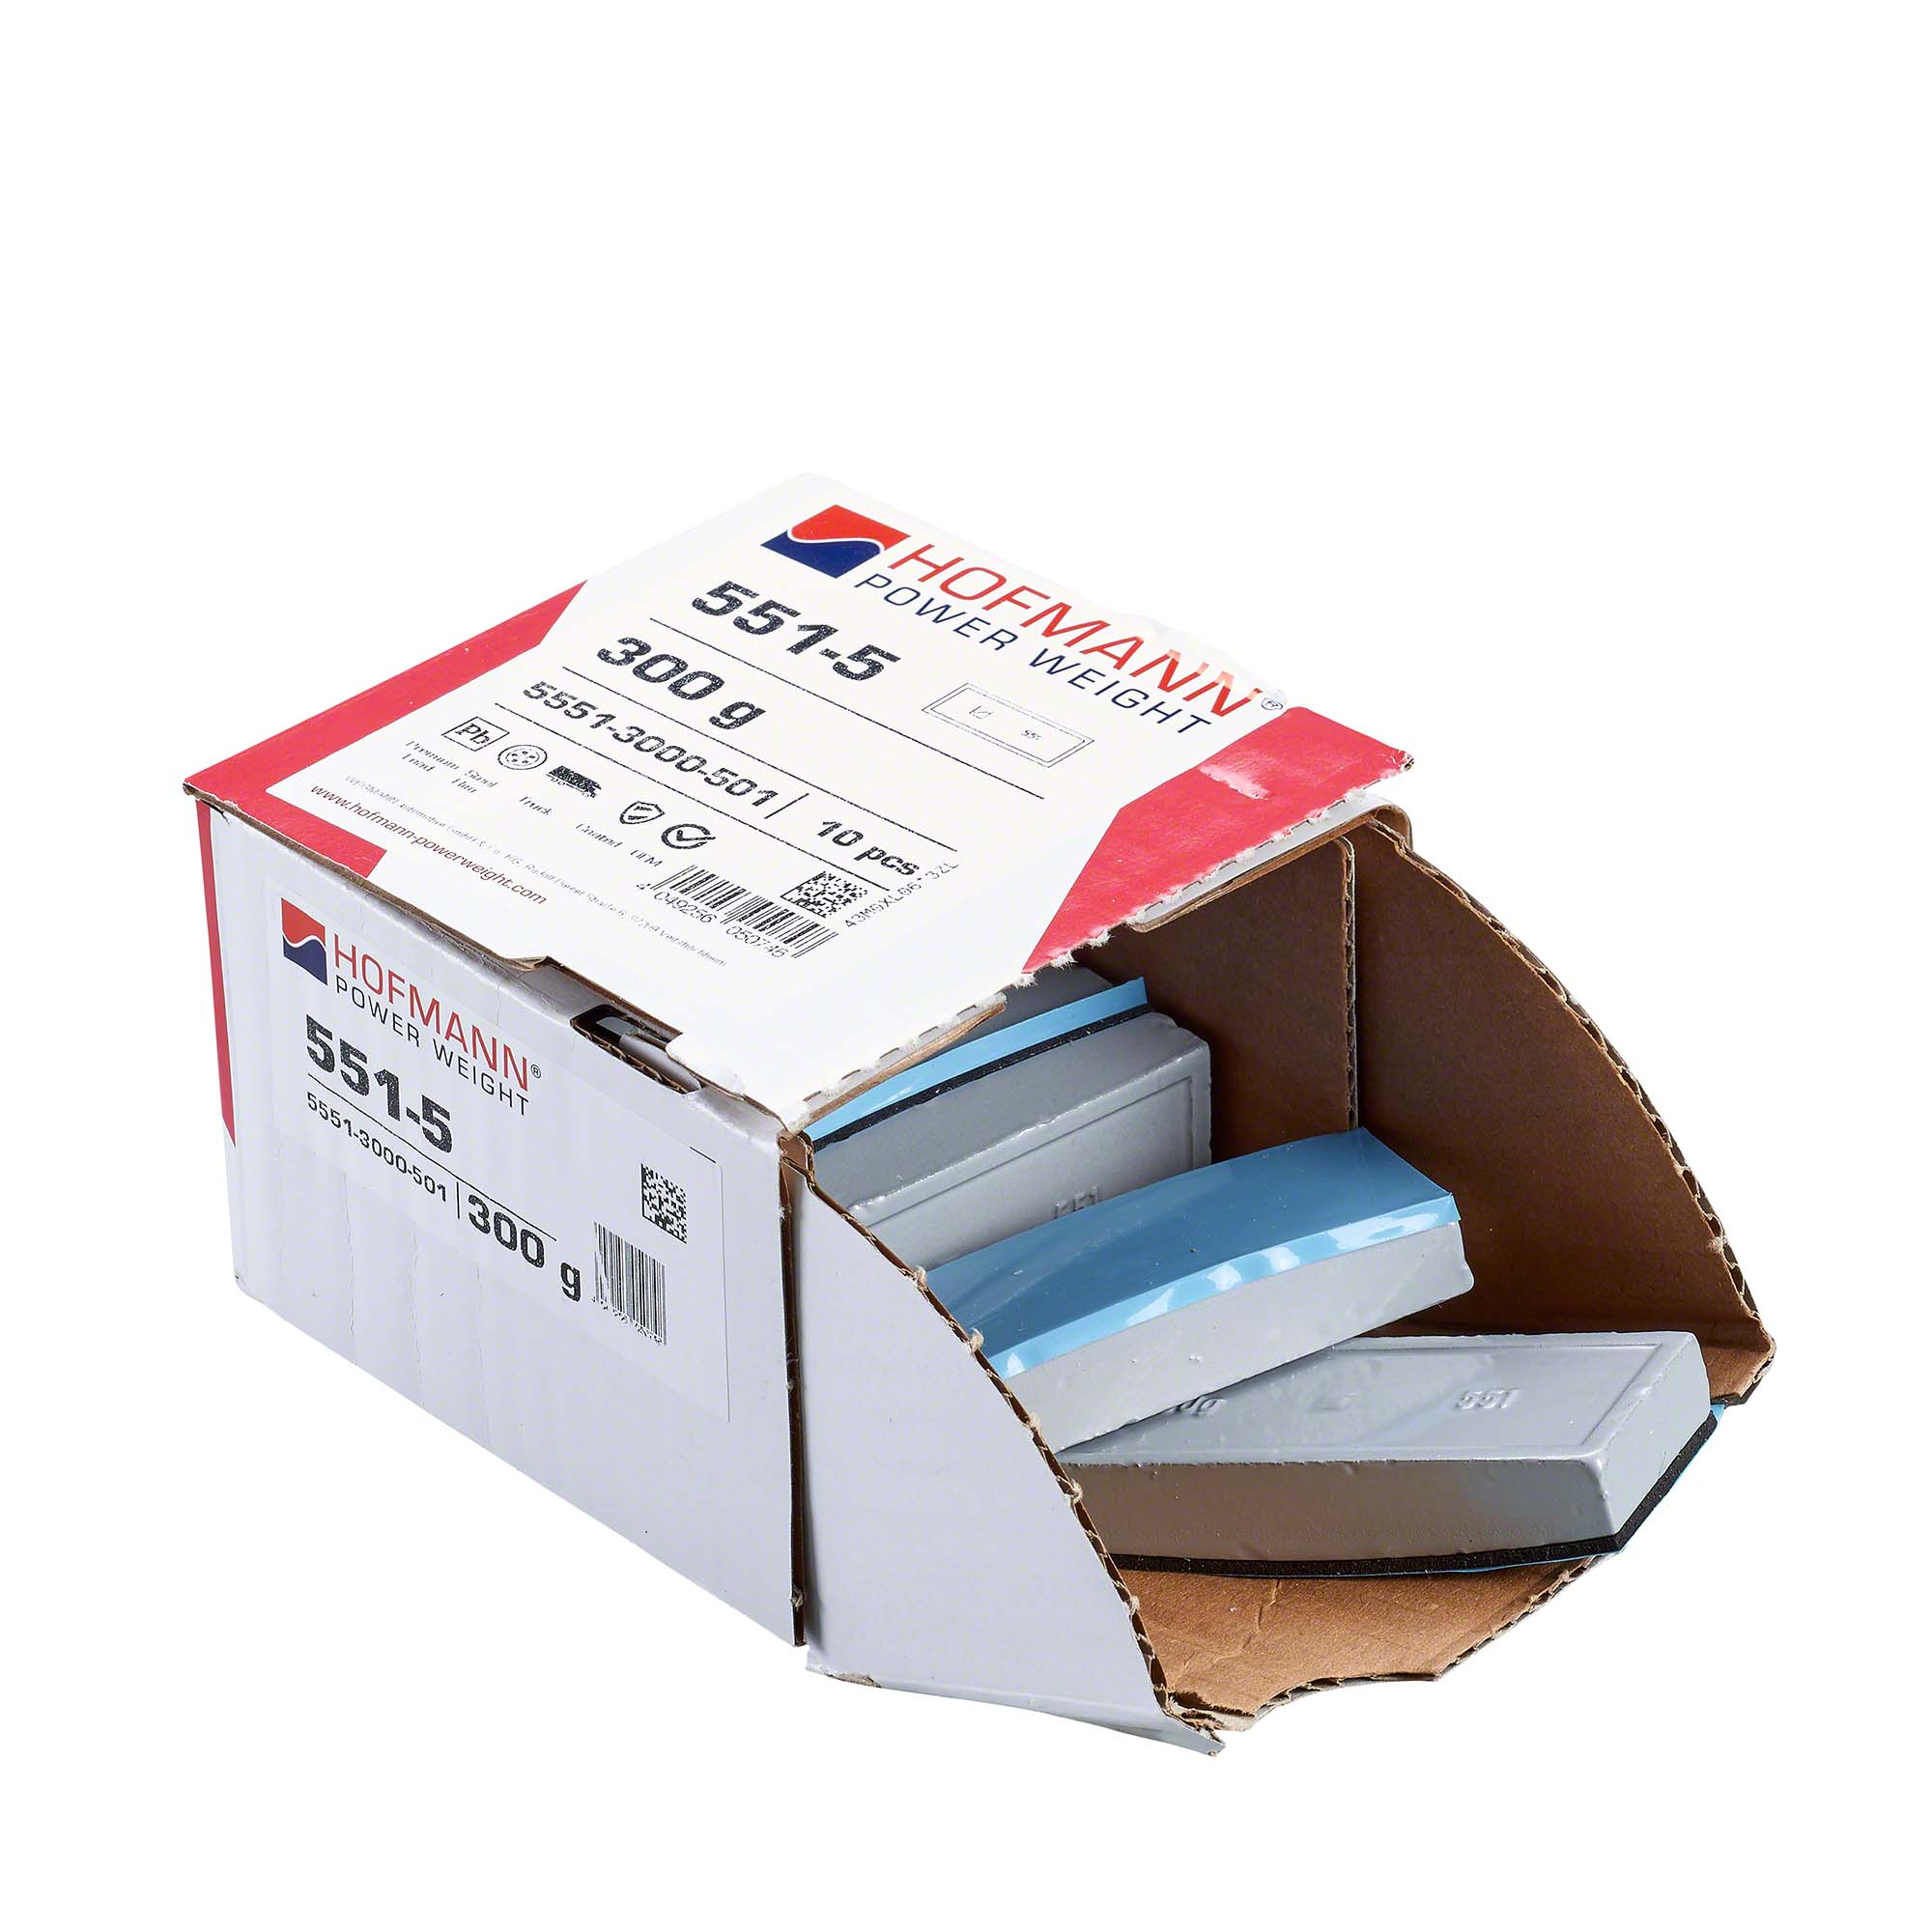 adhesive weight - Typ 551, 300 g, Lead, silver